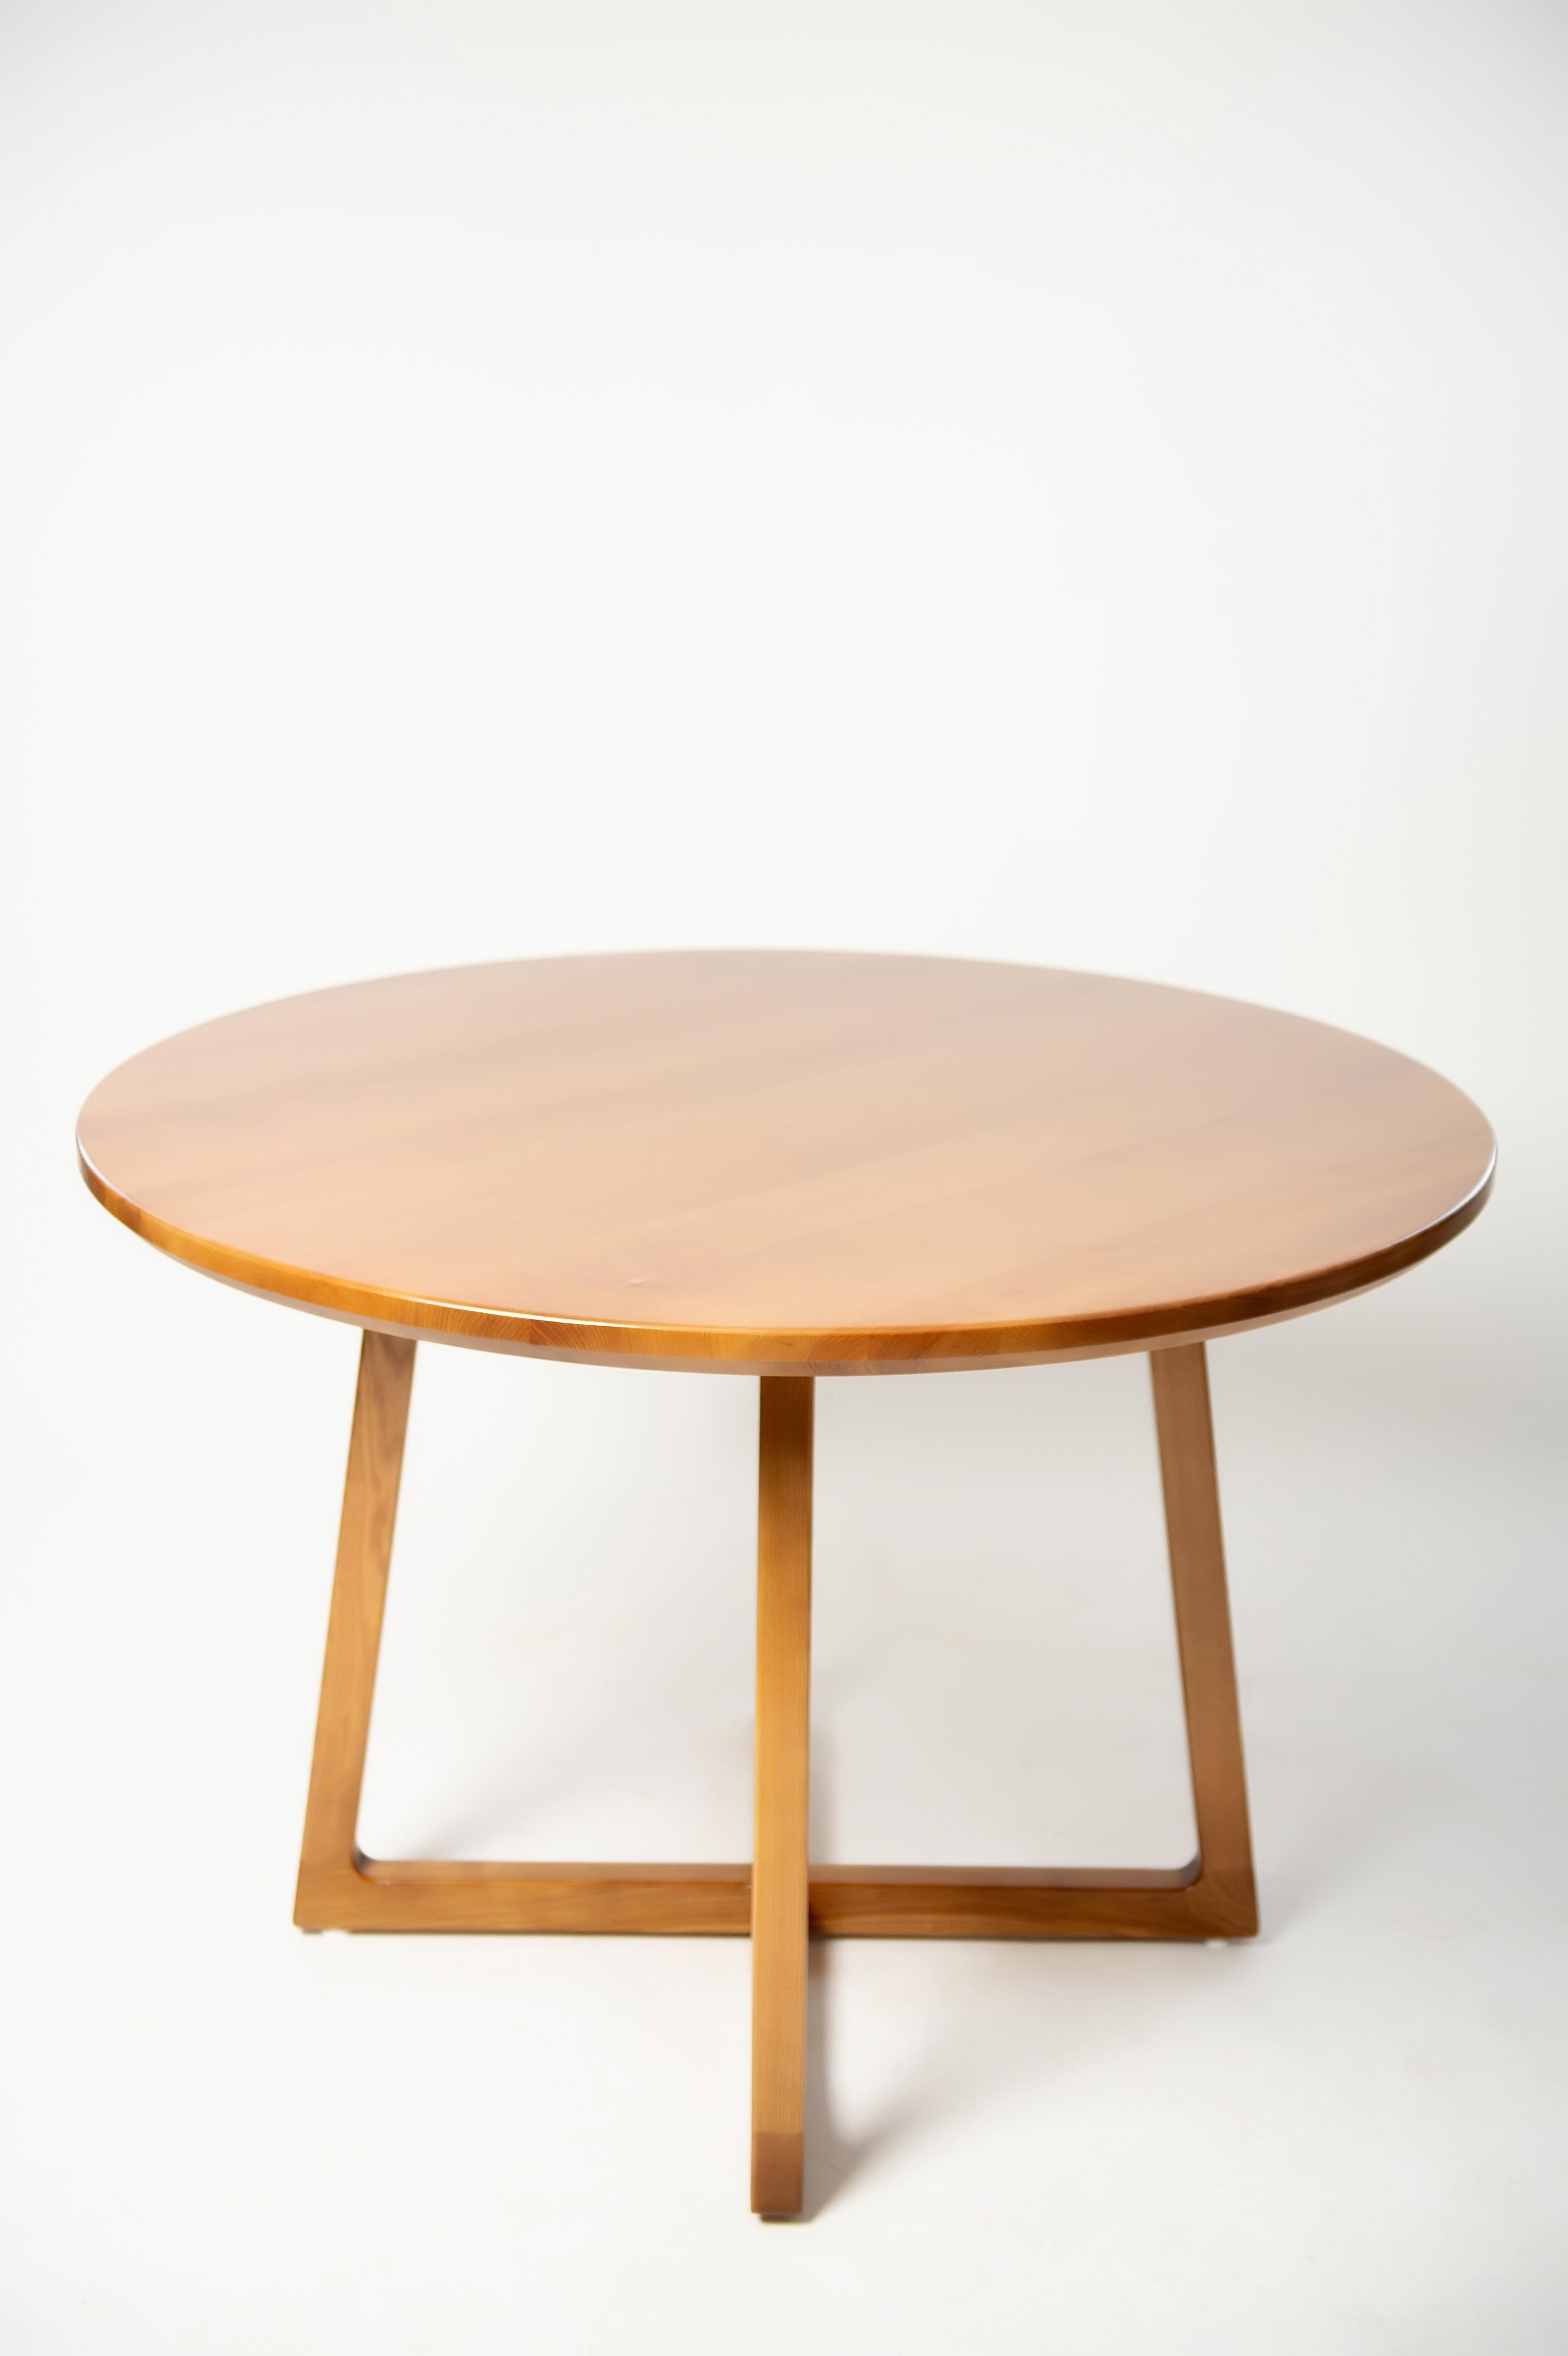 light wood round dining table